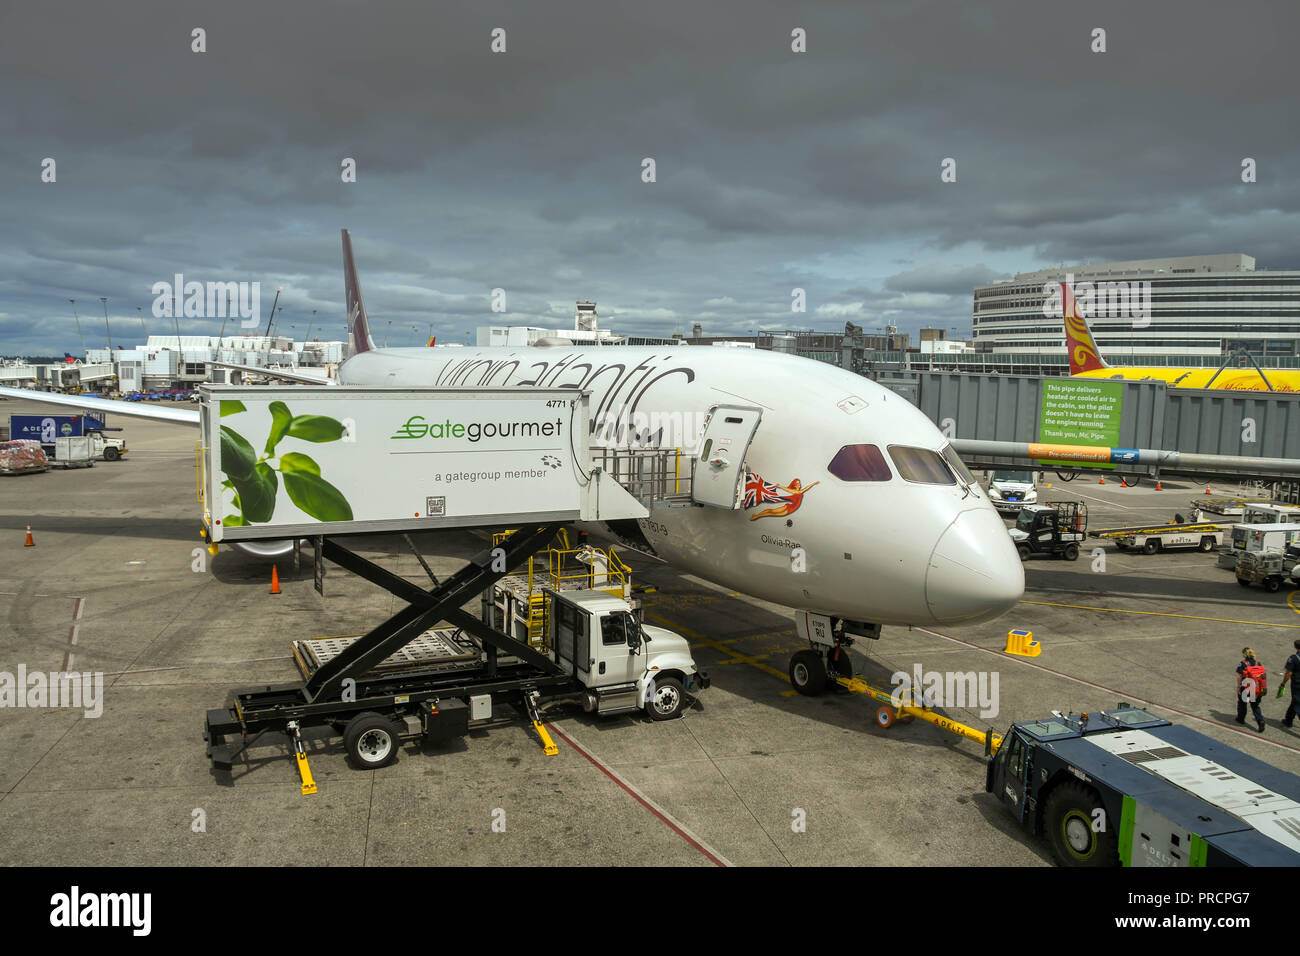 SEATTLE TACOMA AIRPORT, WA, USA - JUNE 2018: Gate Gourmet hydraulic lift truck loading catering supplies onto a Virgin Atlantic Boeing 787 Dreamliner. Stock Photo